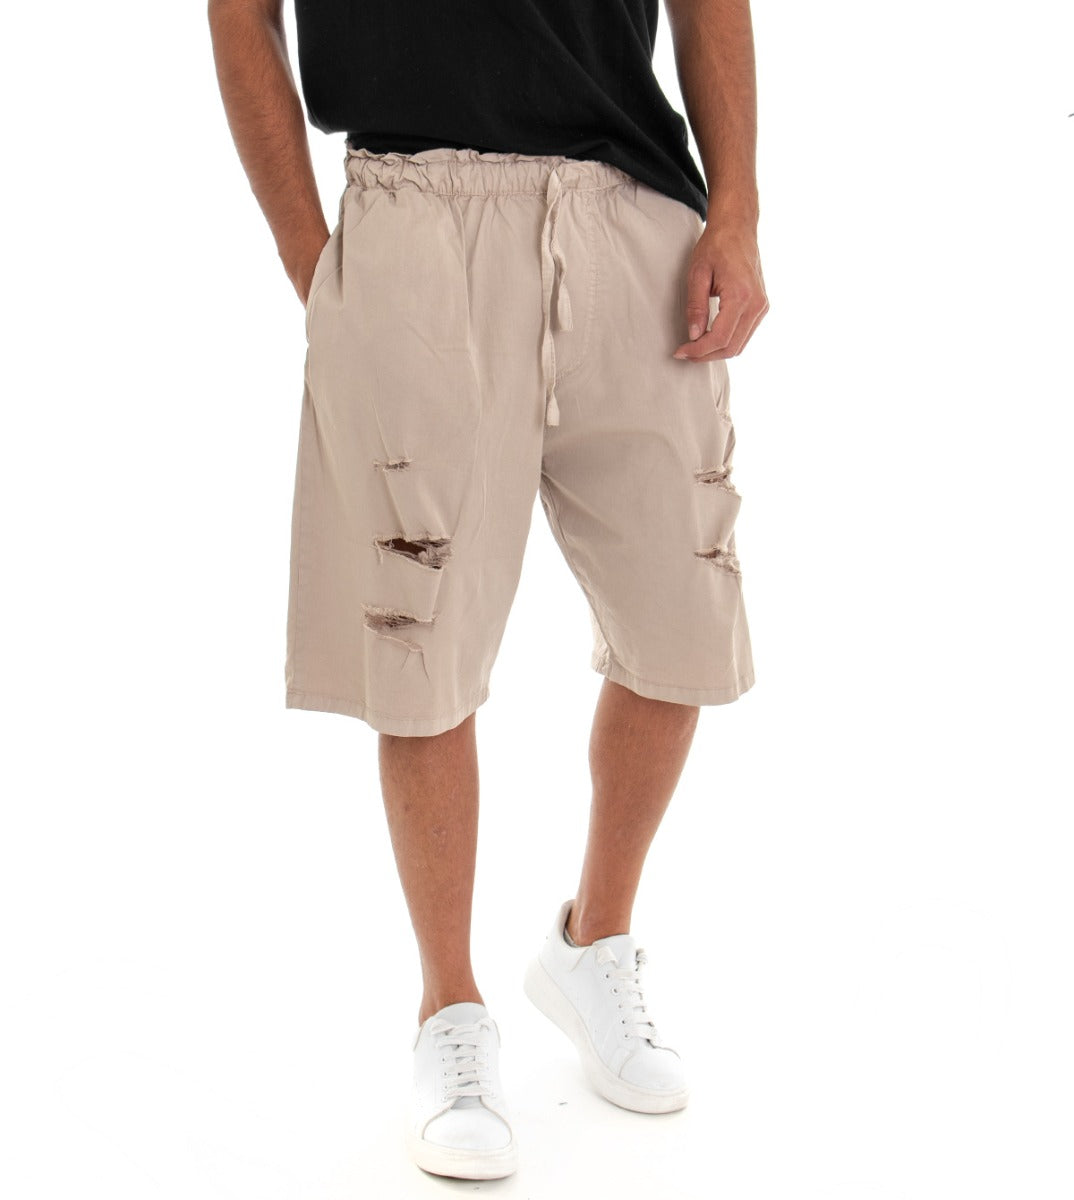 Bermuda Shorts Men's Shorts Over Solid Color Beige Breaks GIOSAL-PC1528A